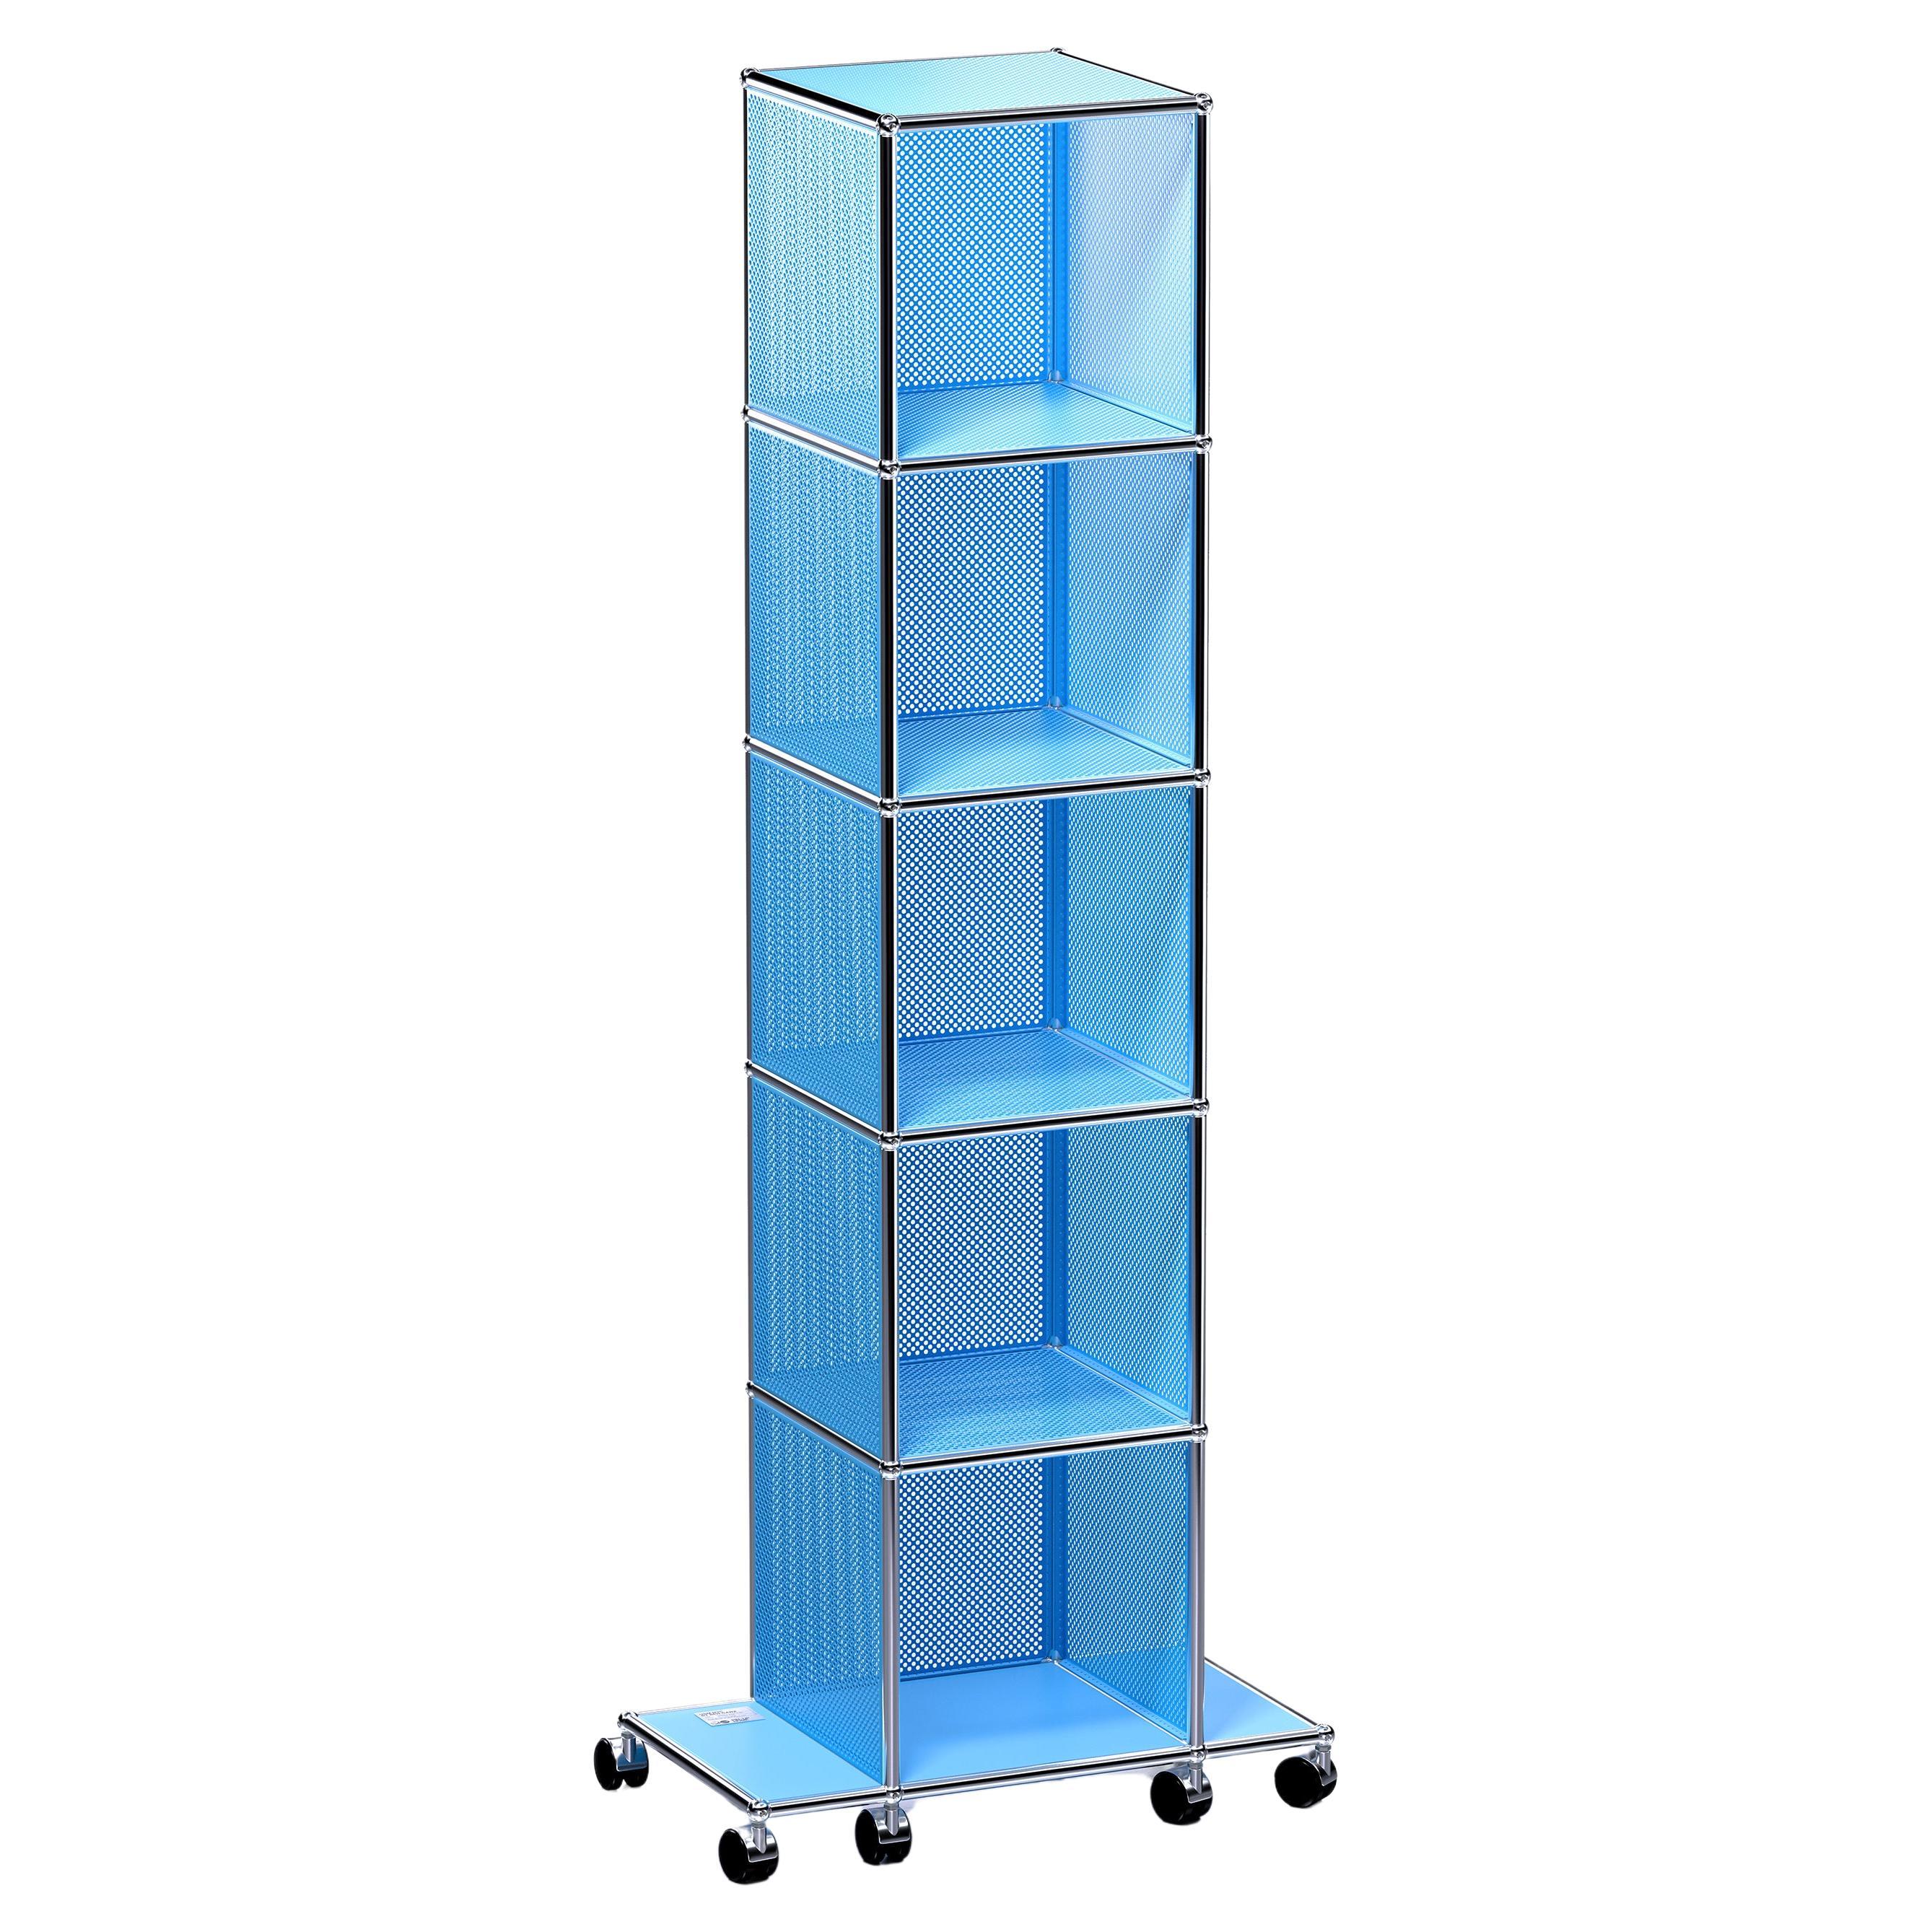 Limited Edition USM New Uptown Blue Tower High Rise by Ben Ganz in Stock